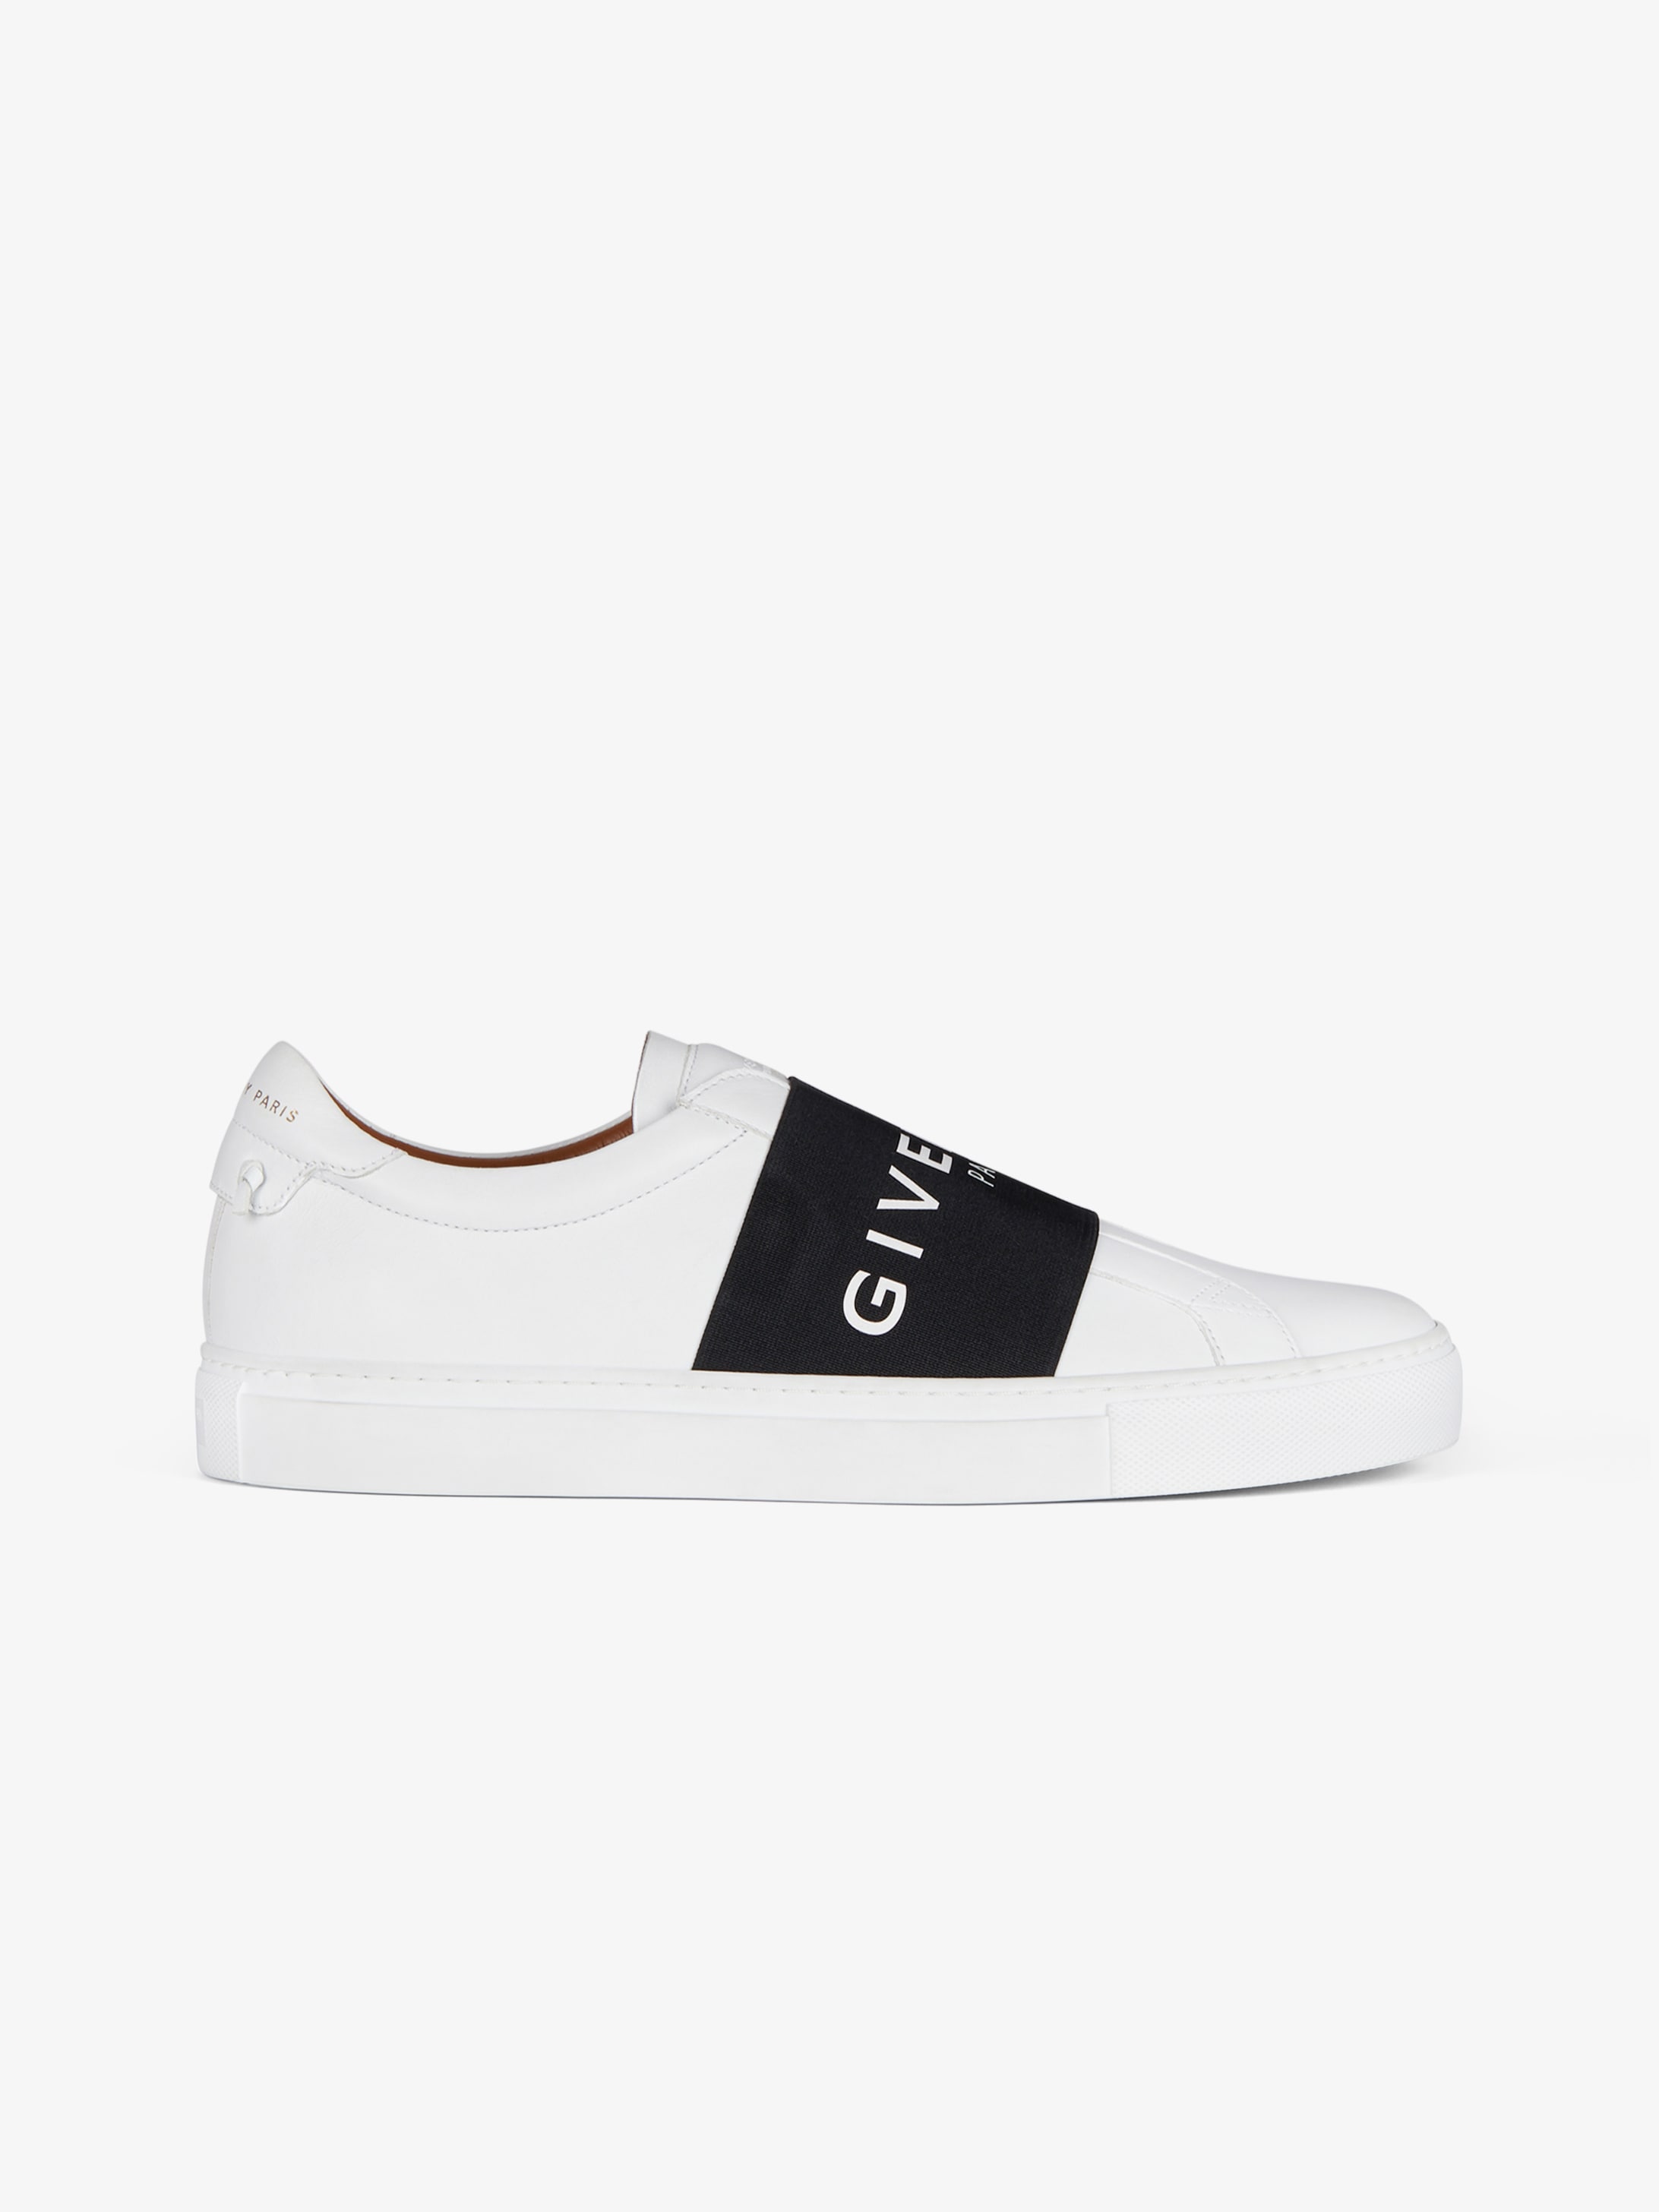 givenchy slip on sneakers